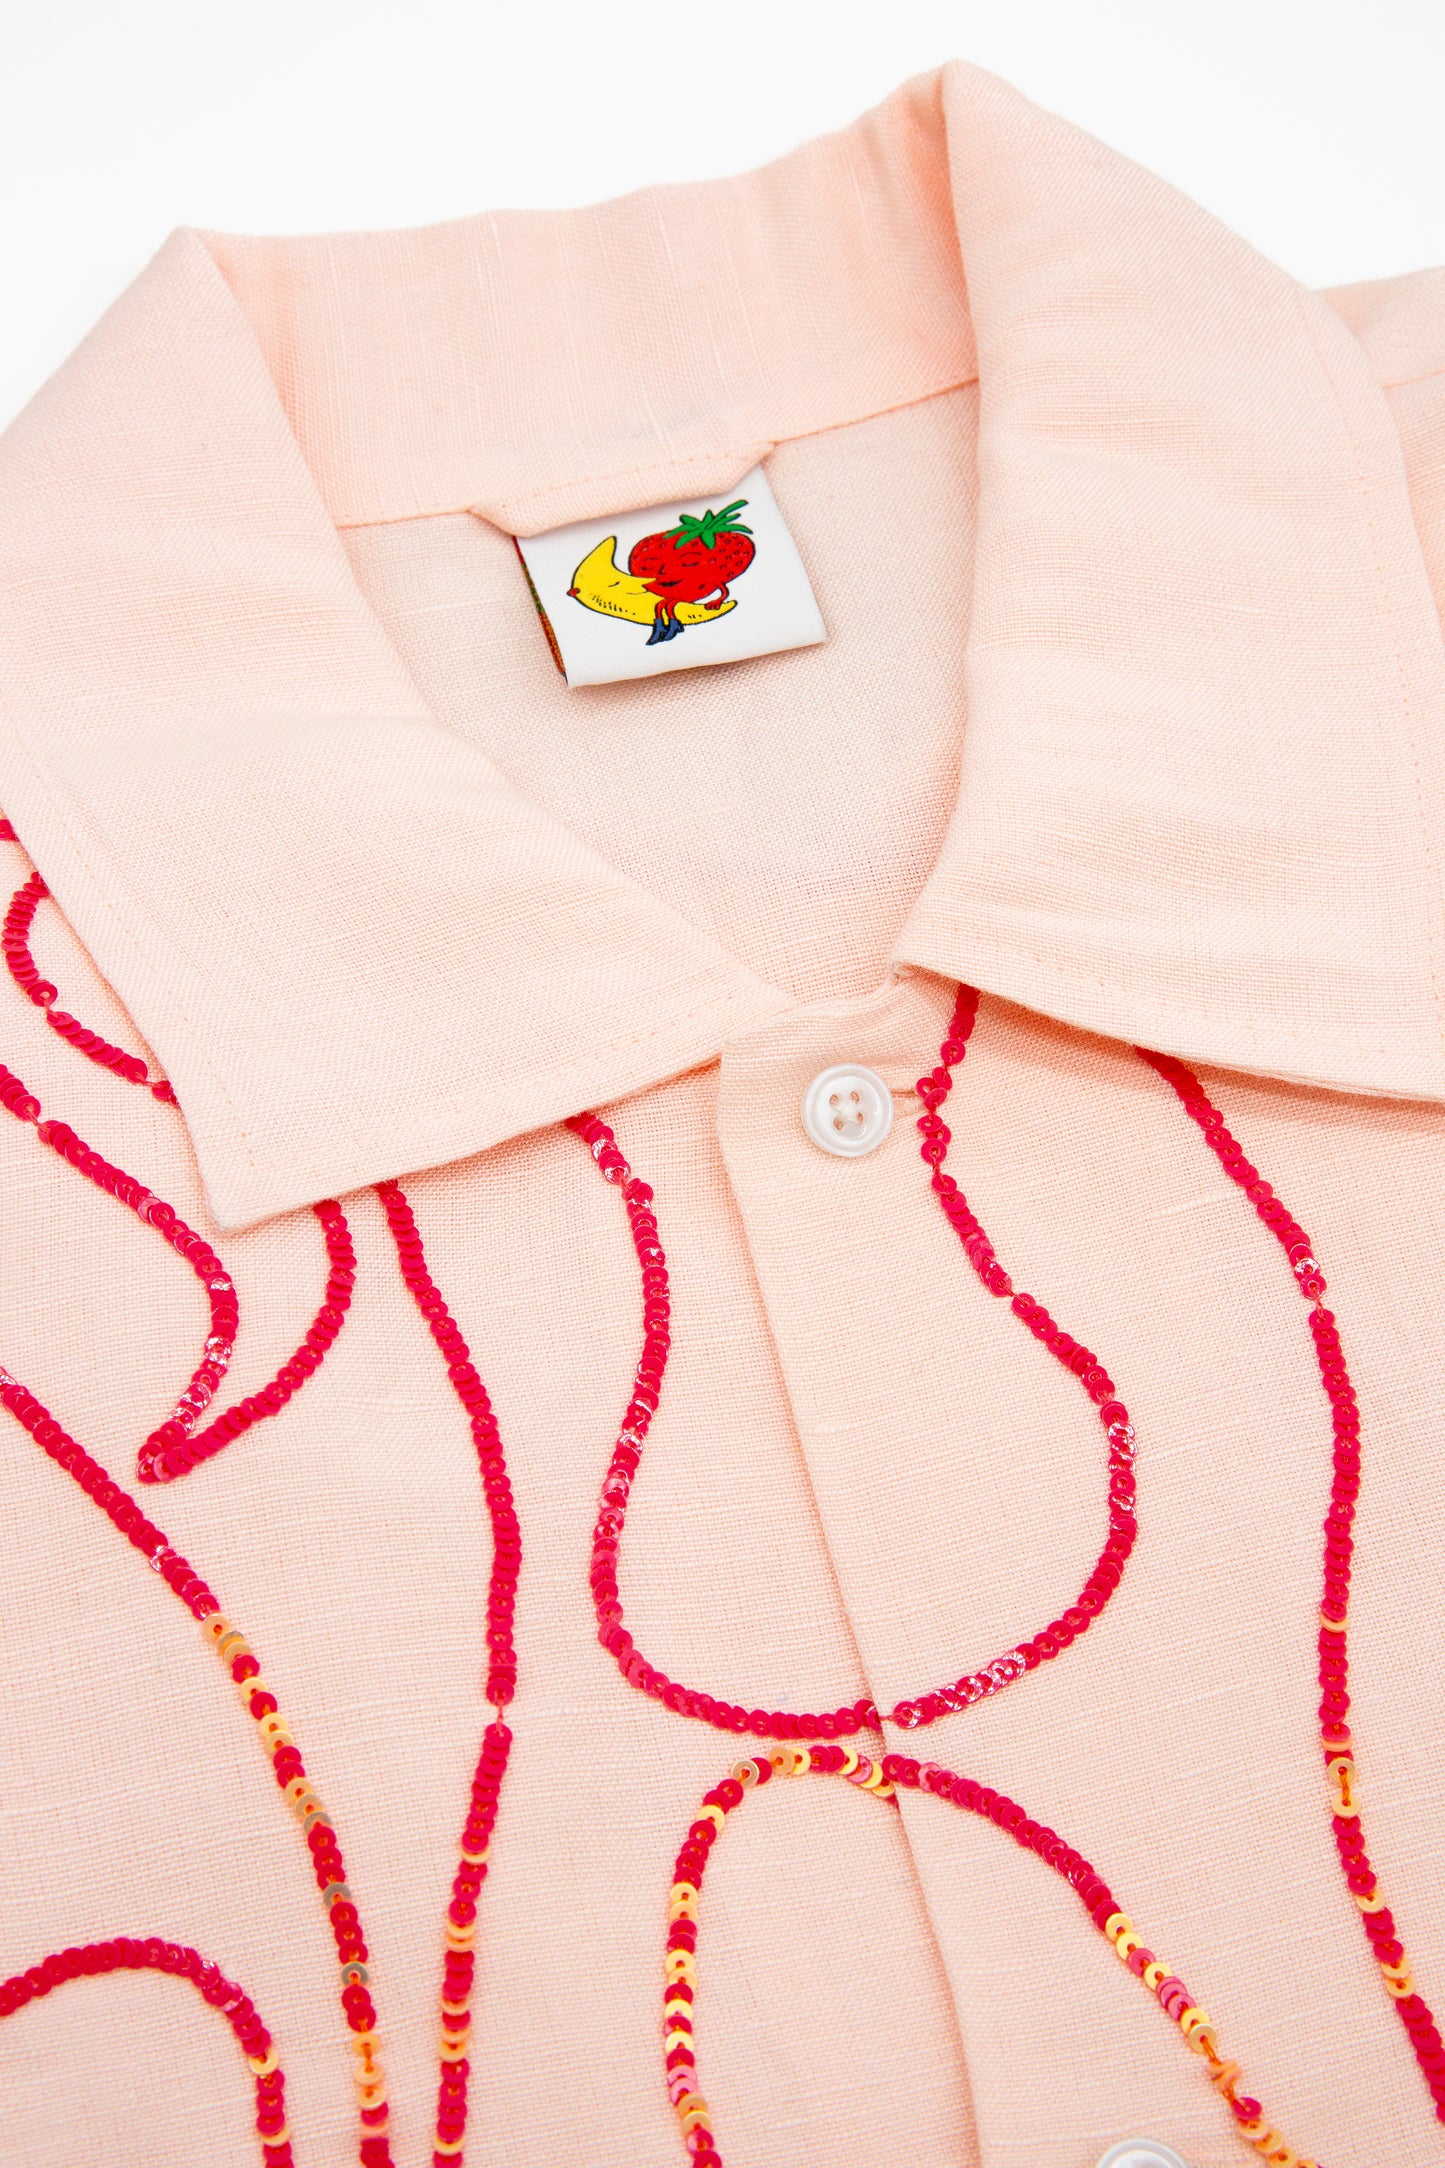 FLAME EMBROIDERED SHIRT